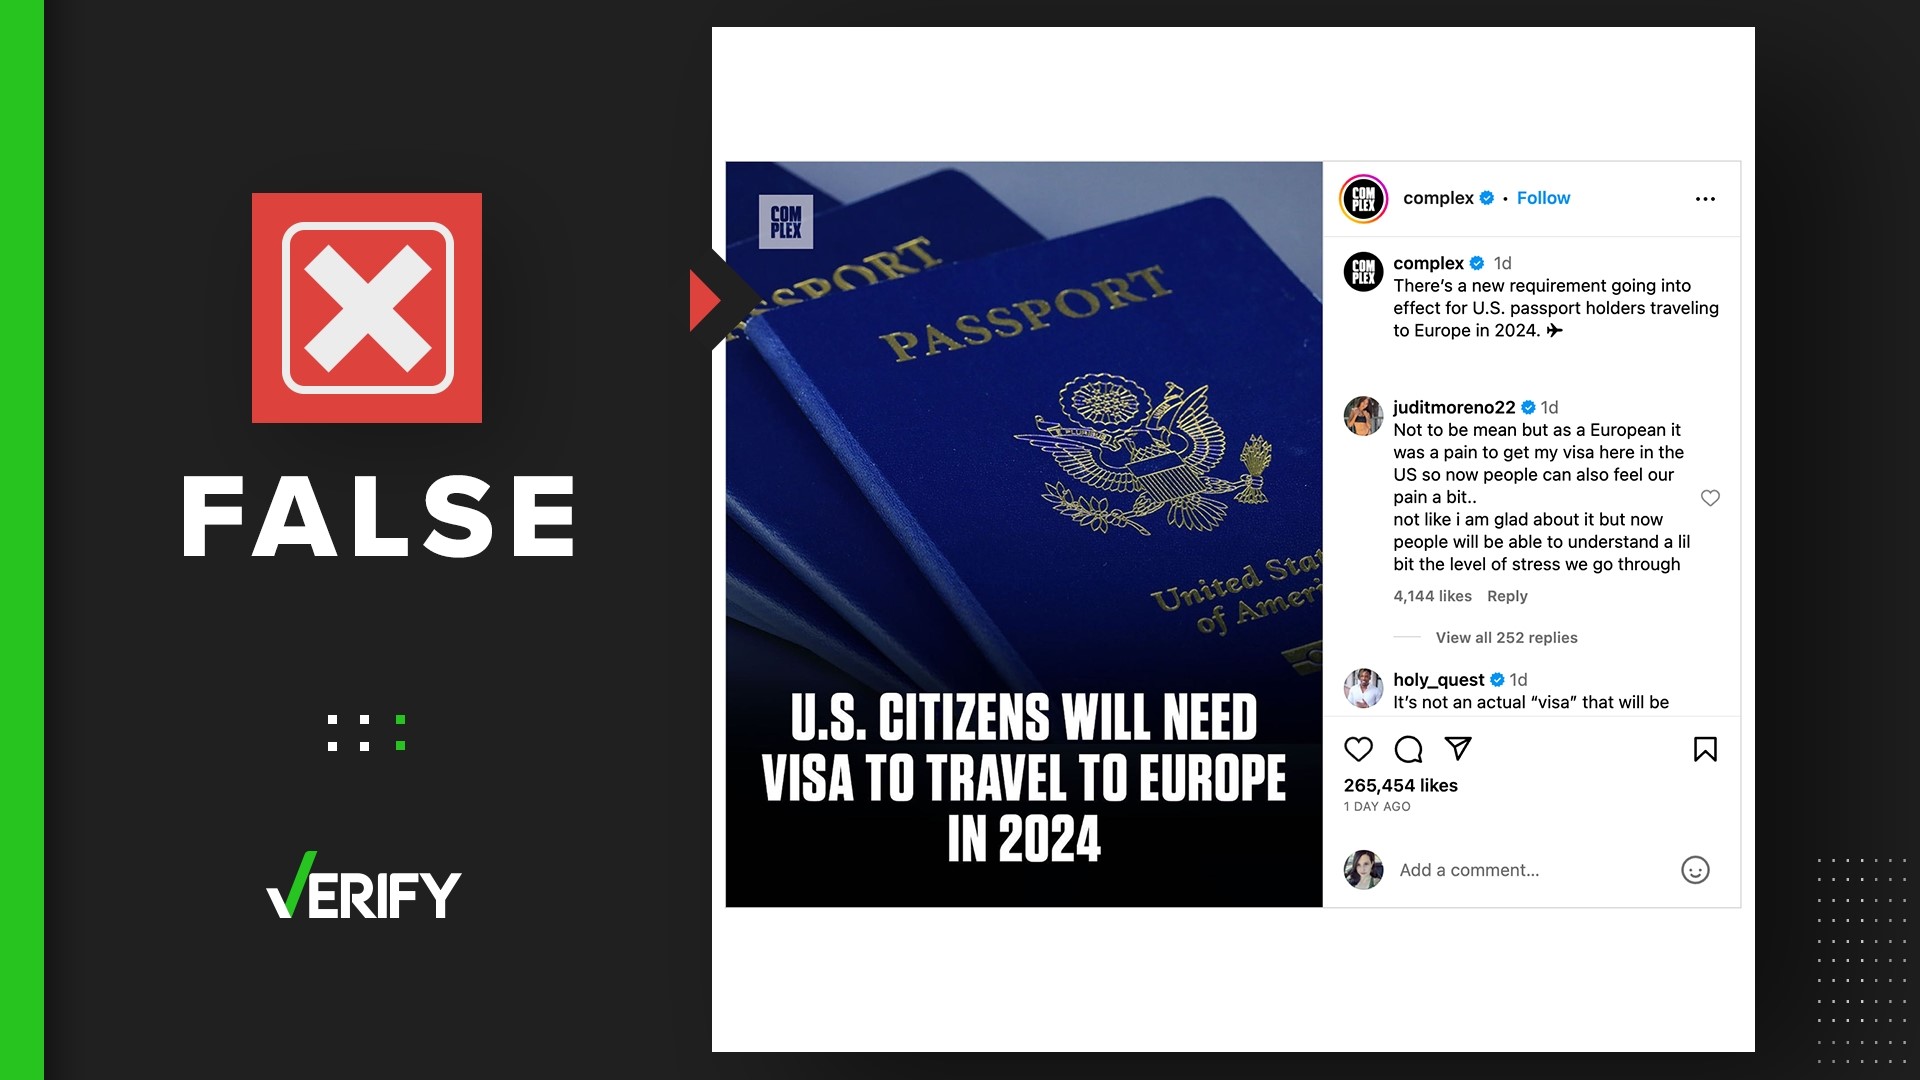 The Schengen Area, which includes France and Spain, will require American travelers to fill out an online application called ETIAS before entry. This is not a visa.